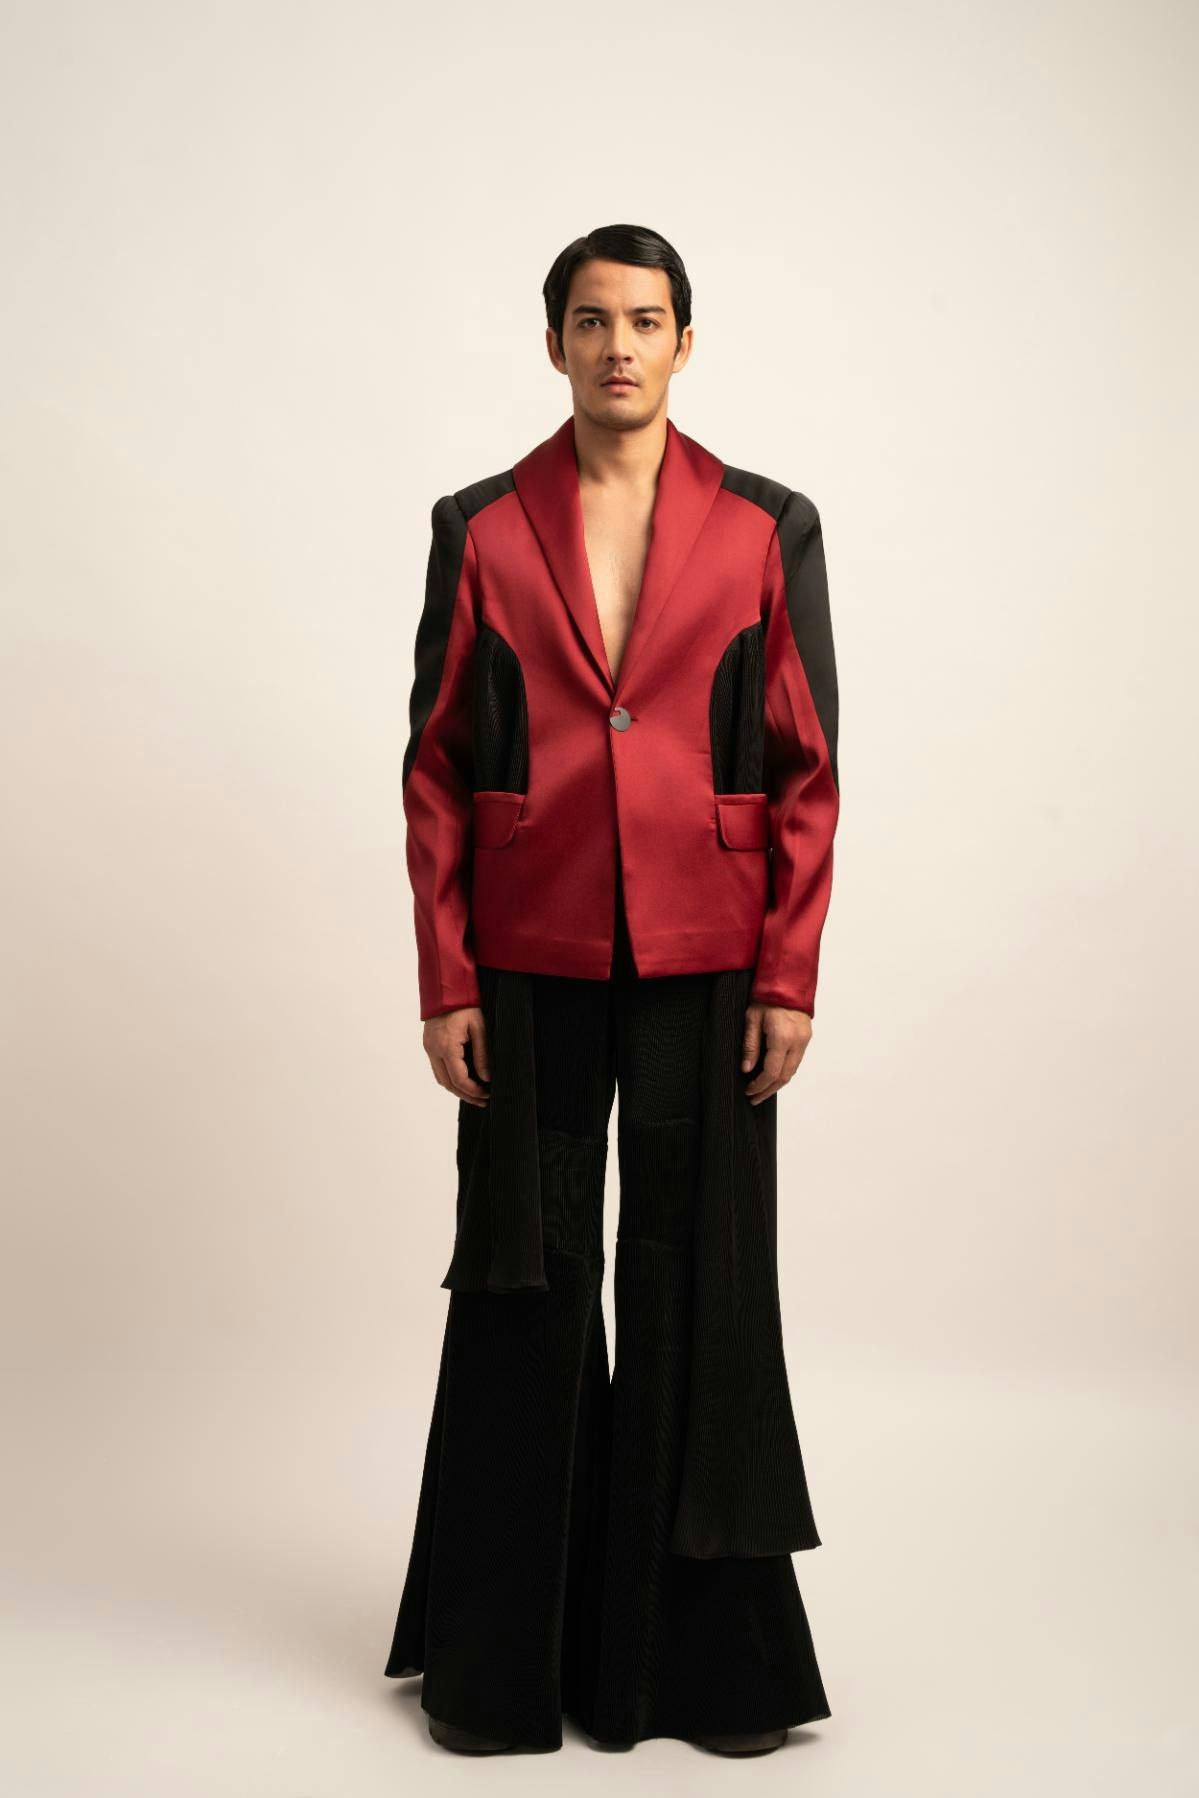 The Futurist Monarch Blazer, a product by Siddhant Agrawal Label